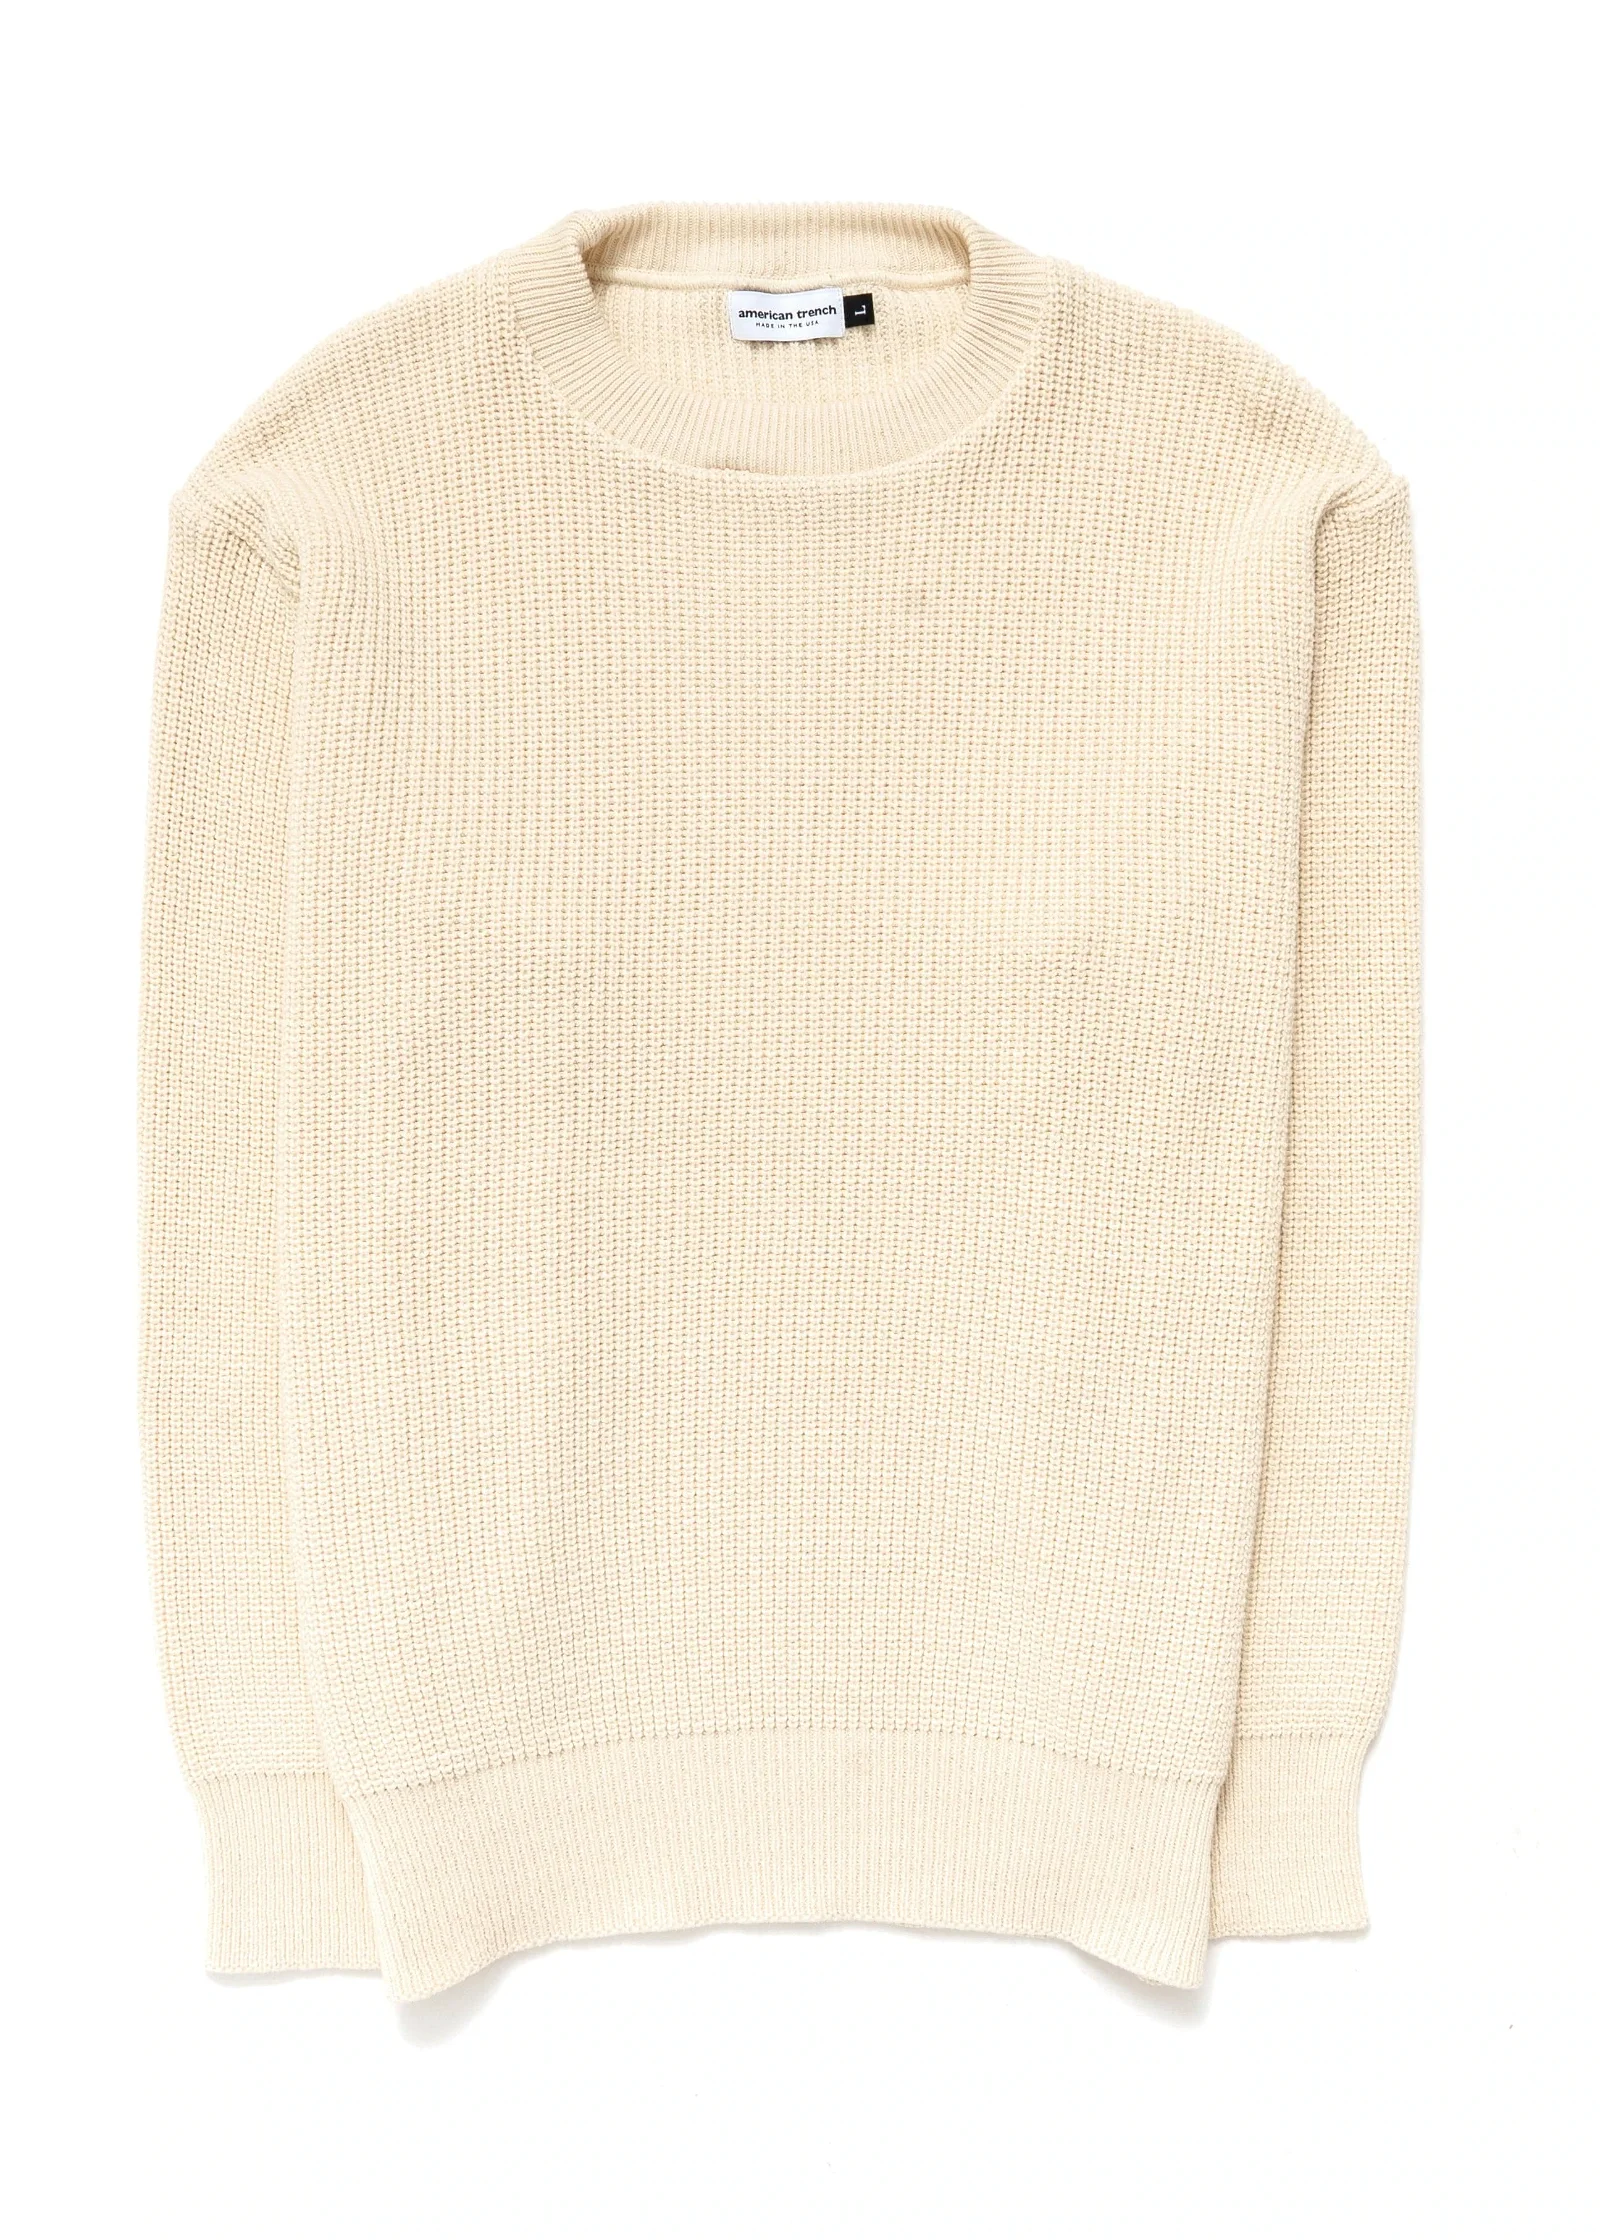 Image of Shaker Knit Cotton Sweater